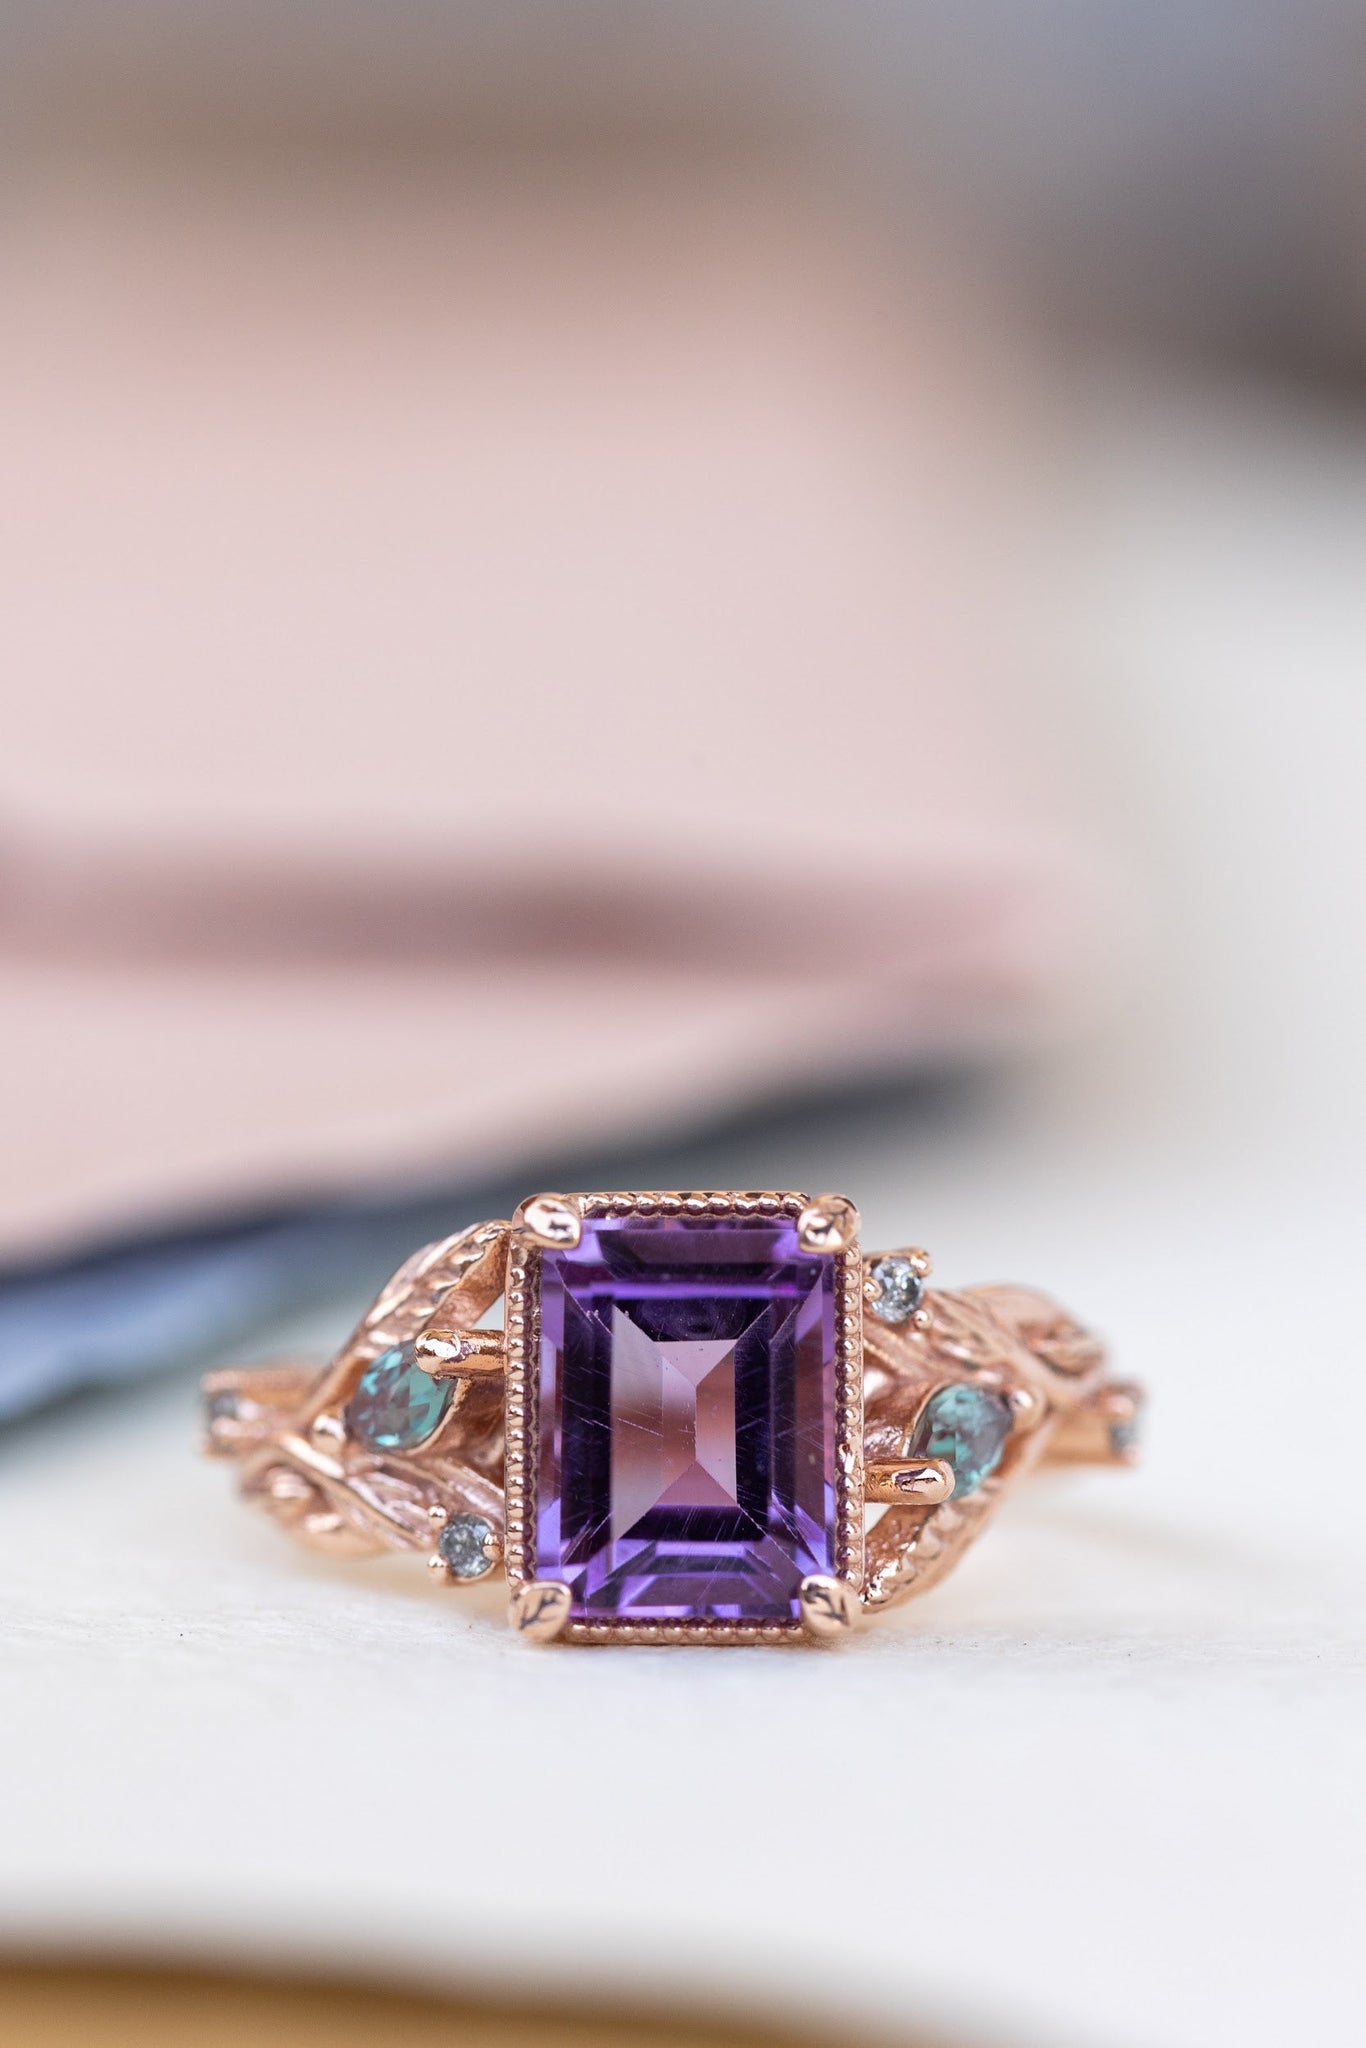 READY TO SHIP: Patricia ring in 14K rose gold, natural amethyst emerald cut 8x6 mm, accents lab alexandrites and natural salt and pepper diamonds, AVAILABLE RING SIZES: 6-8US - Eden Garden Jewelry™